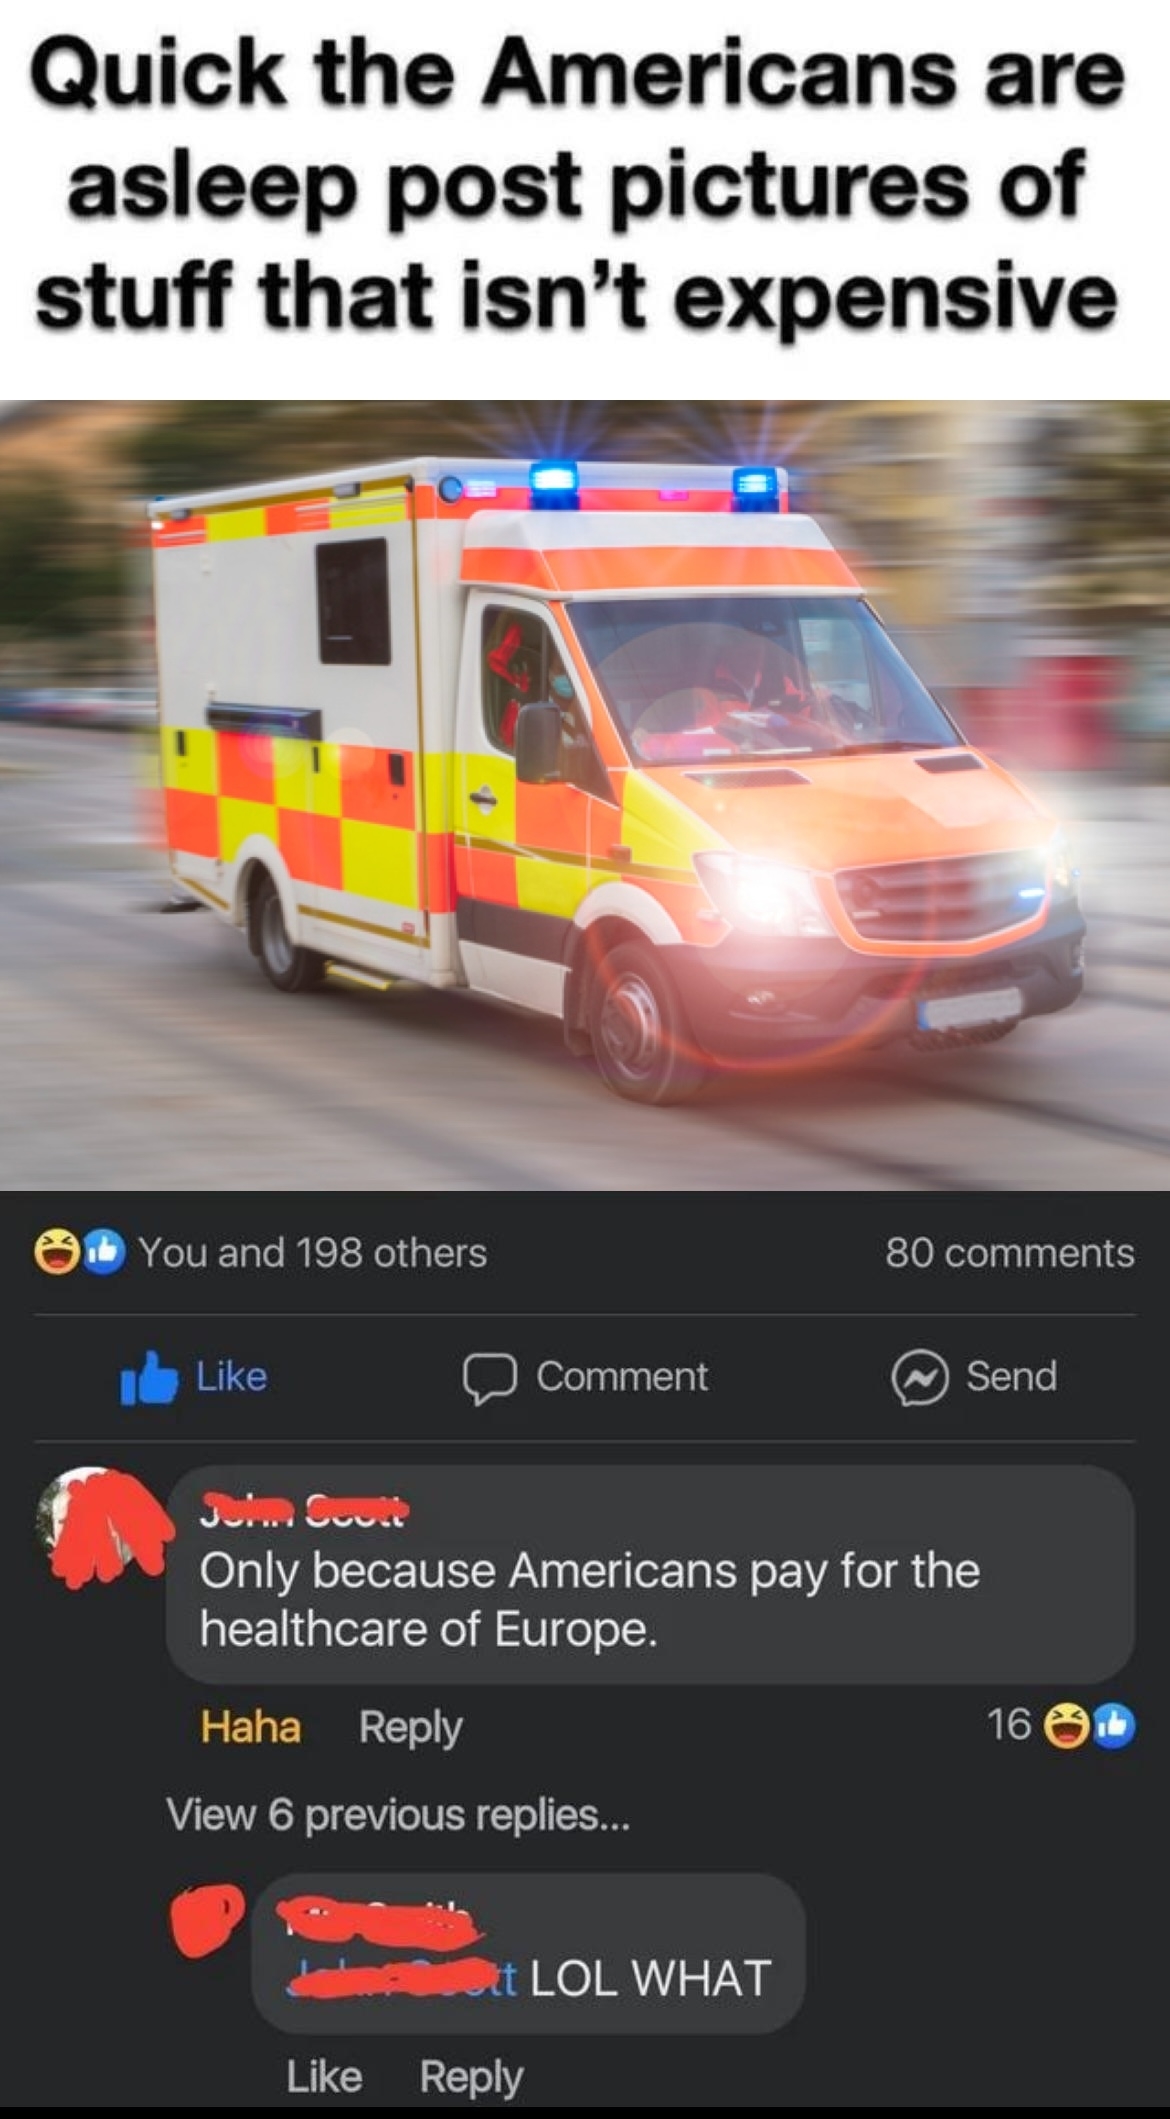 Meme: Blurry ambulance with text &quot;Quick post pictures of stuff the Americans are asleep isn&#x27;t expensive,&quot; with comments jesting about healthcare costs